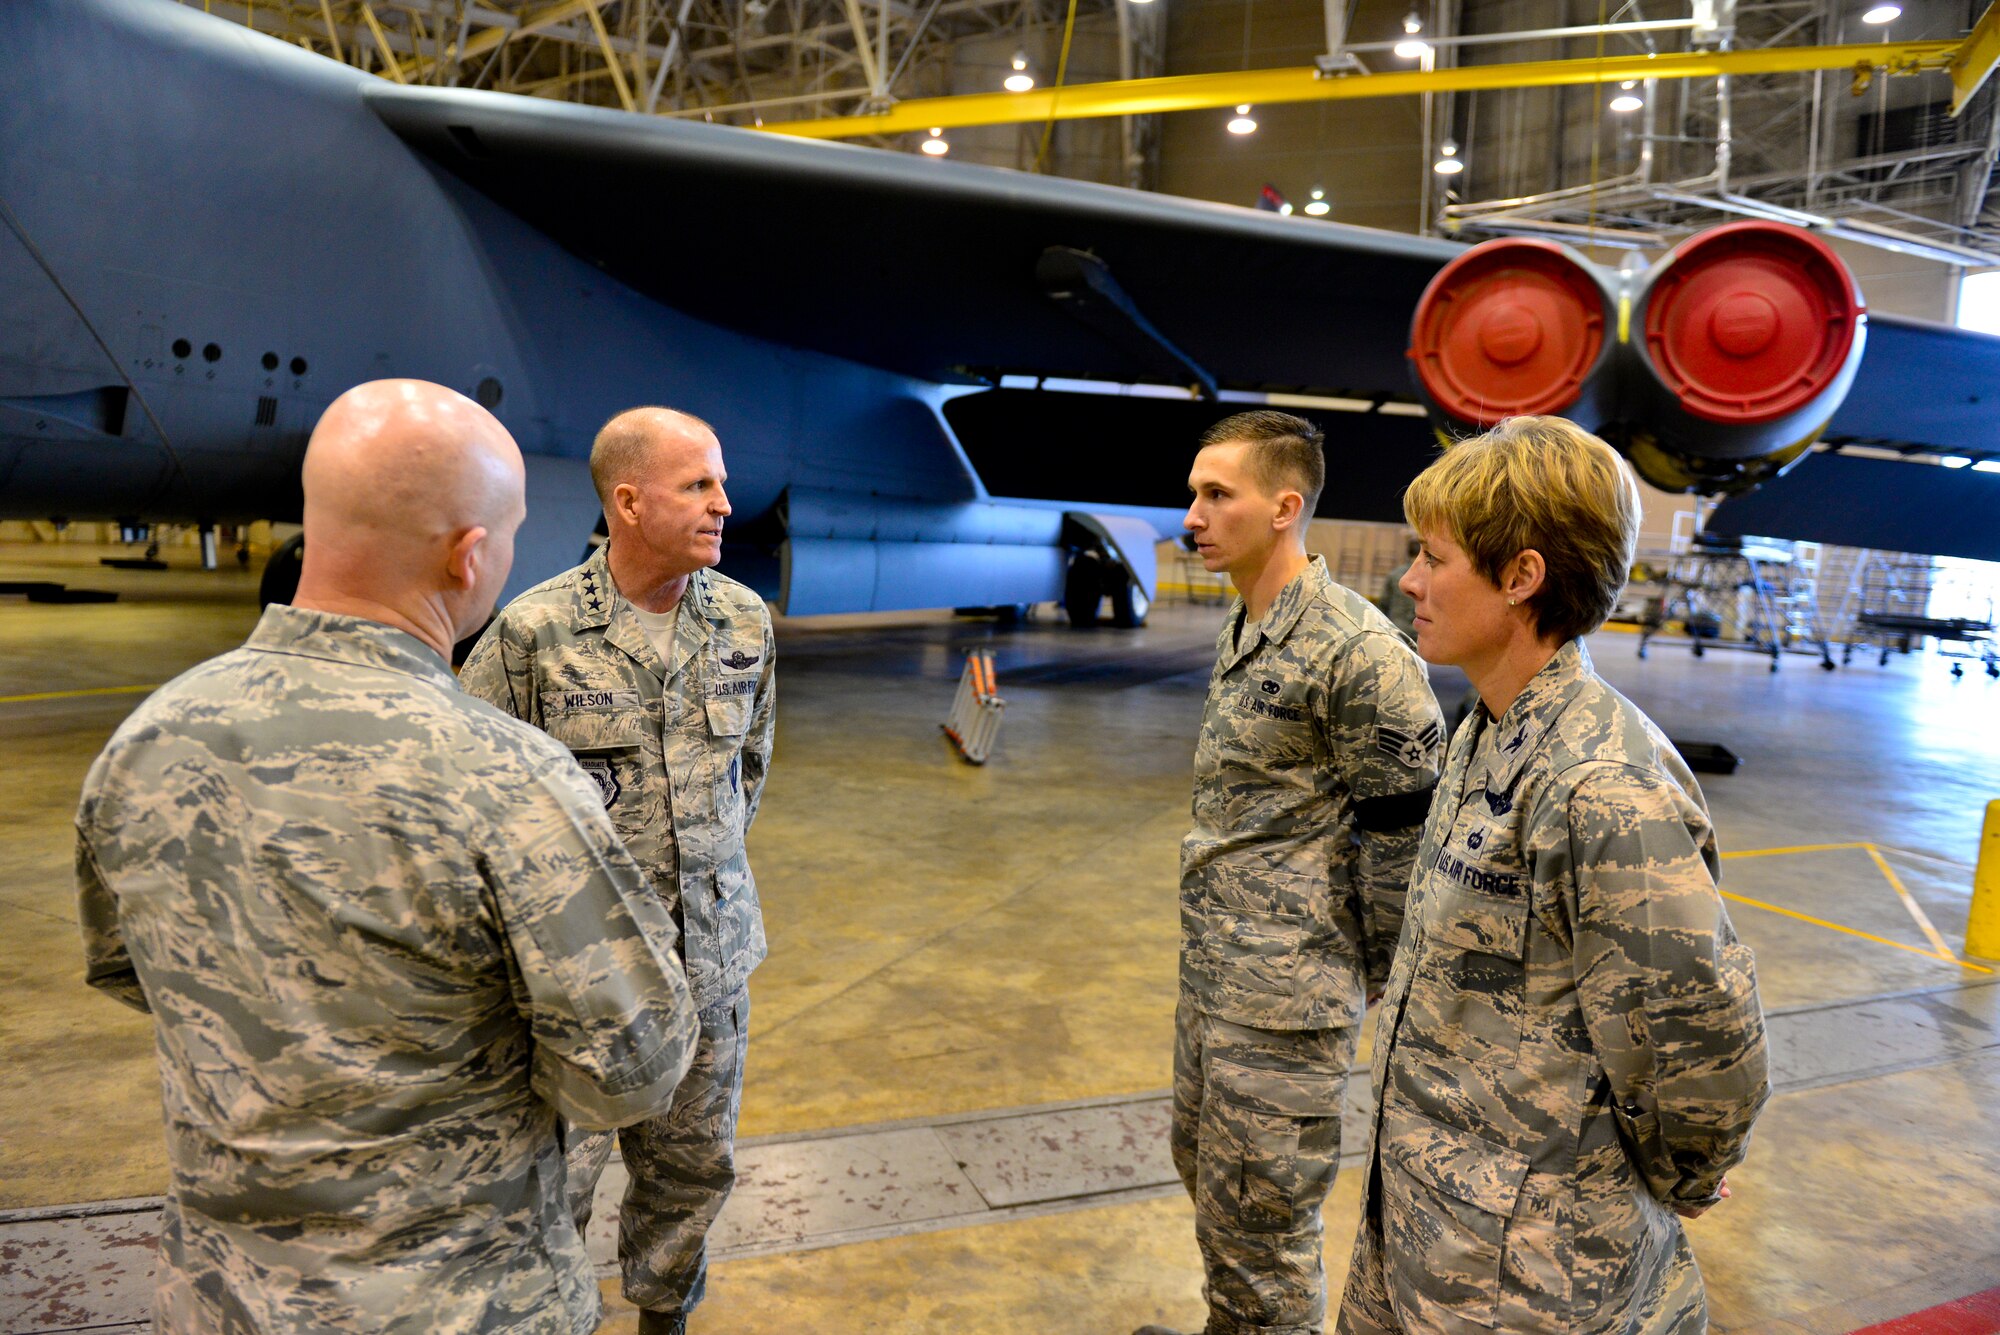 Lt. Gen. Stephen Wilson, commander of Air Force Global Strike Command, visits the 2nd Maintenance Squadron phase hangar on Barksdale Air Force Base, La., Dec. 16, 2014. A periodic inspection is performed on all aircraft with more than 450 flight hours. Access panels are removed and inspected by engineers. Each inspection is a 14-day phase starting with panel removal and 11 maintenance flights inspect each component of the aircraft looking for defects. (U.S. Air Force photo/Airman 1st Class Mozer O. Da Cunha) 